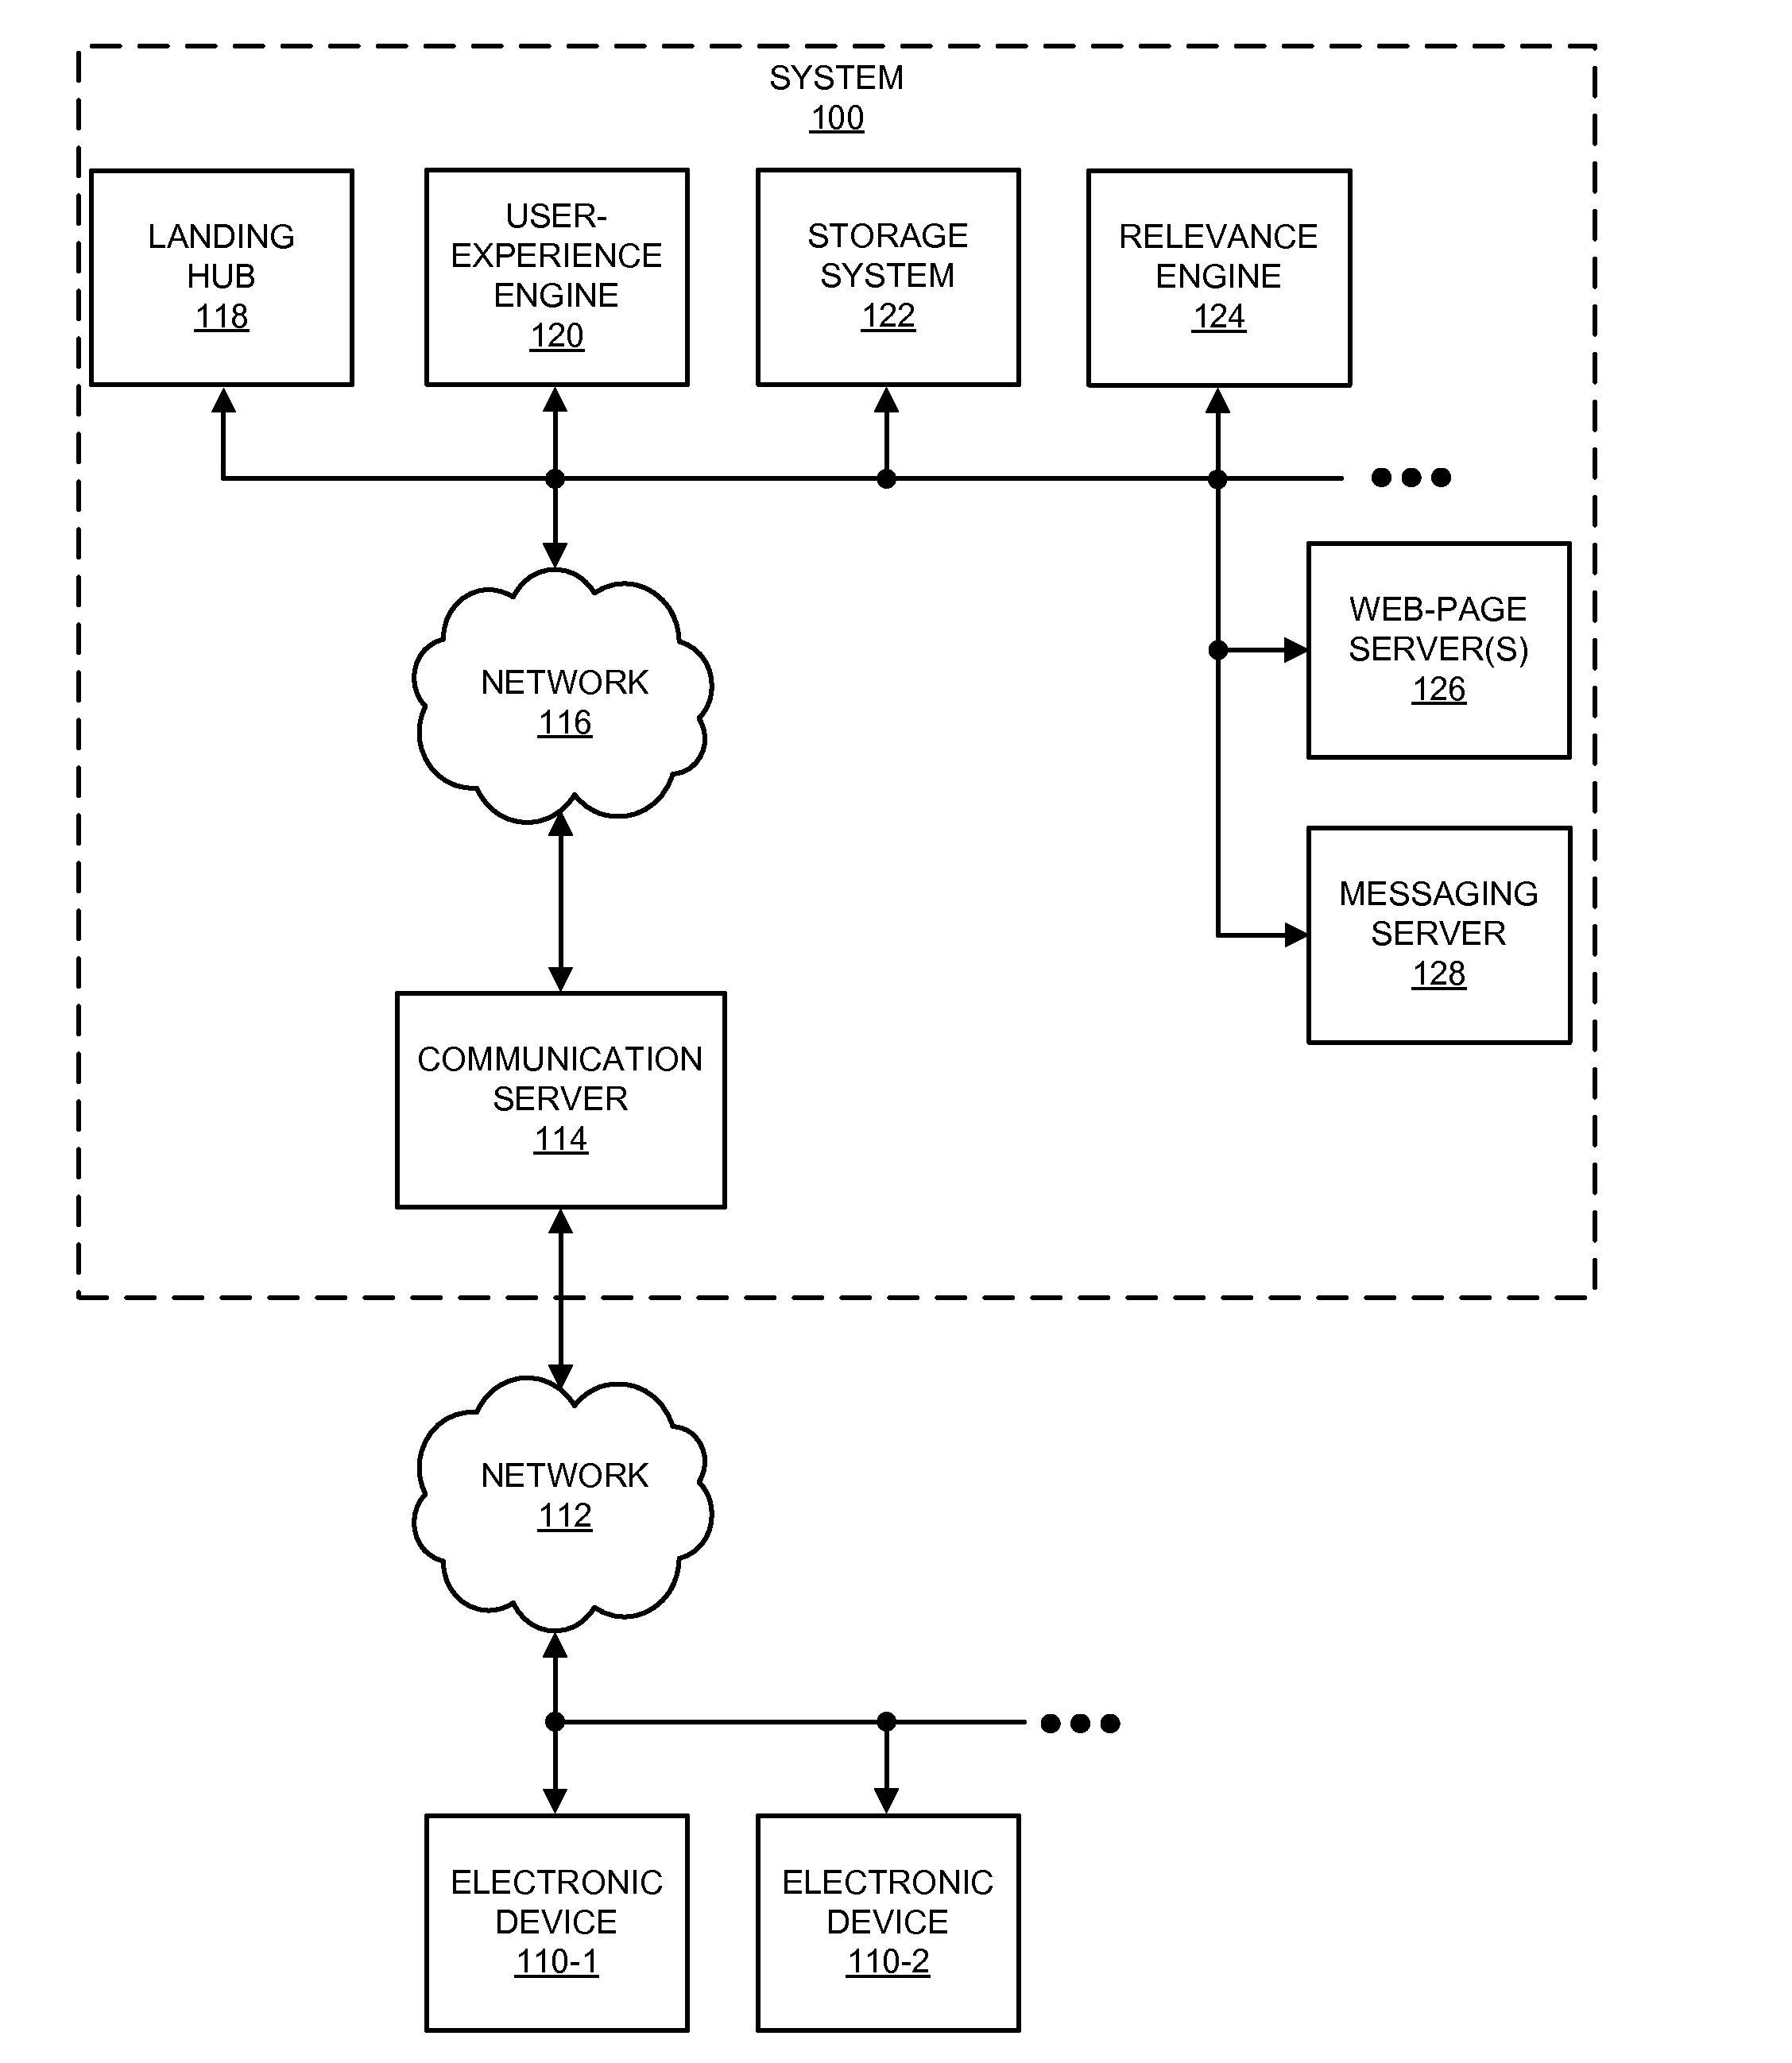 User-activity-based routing within a website